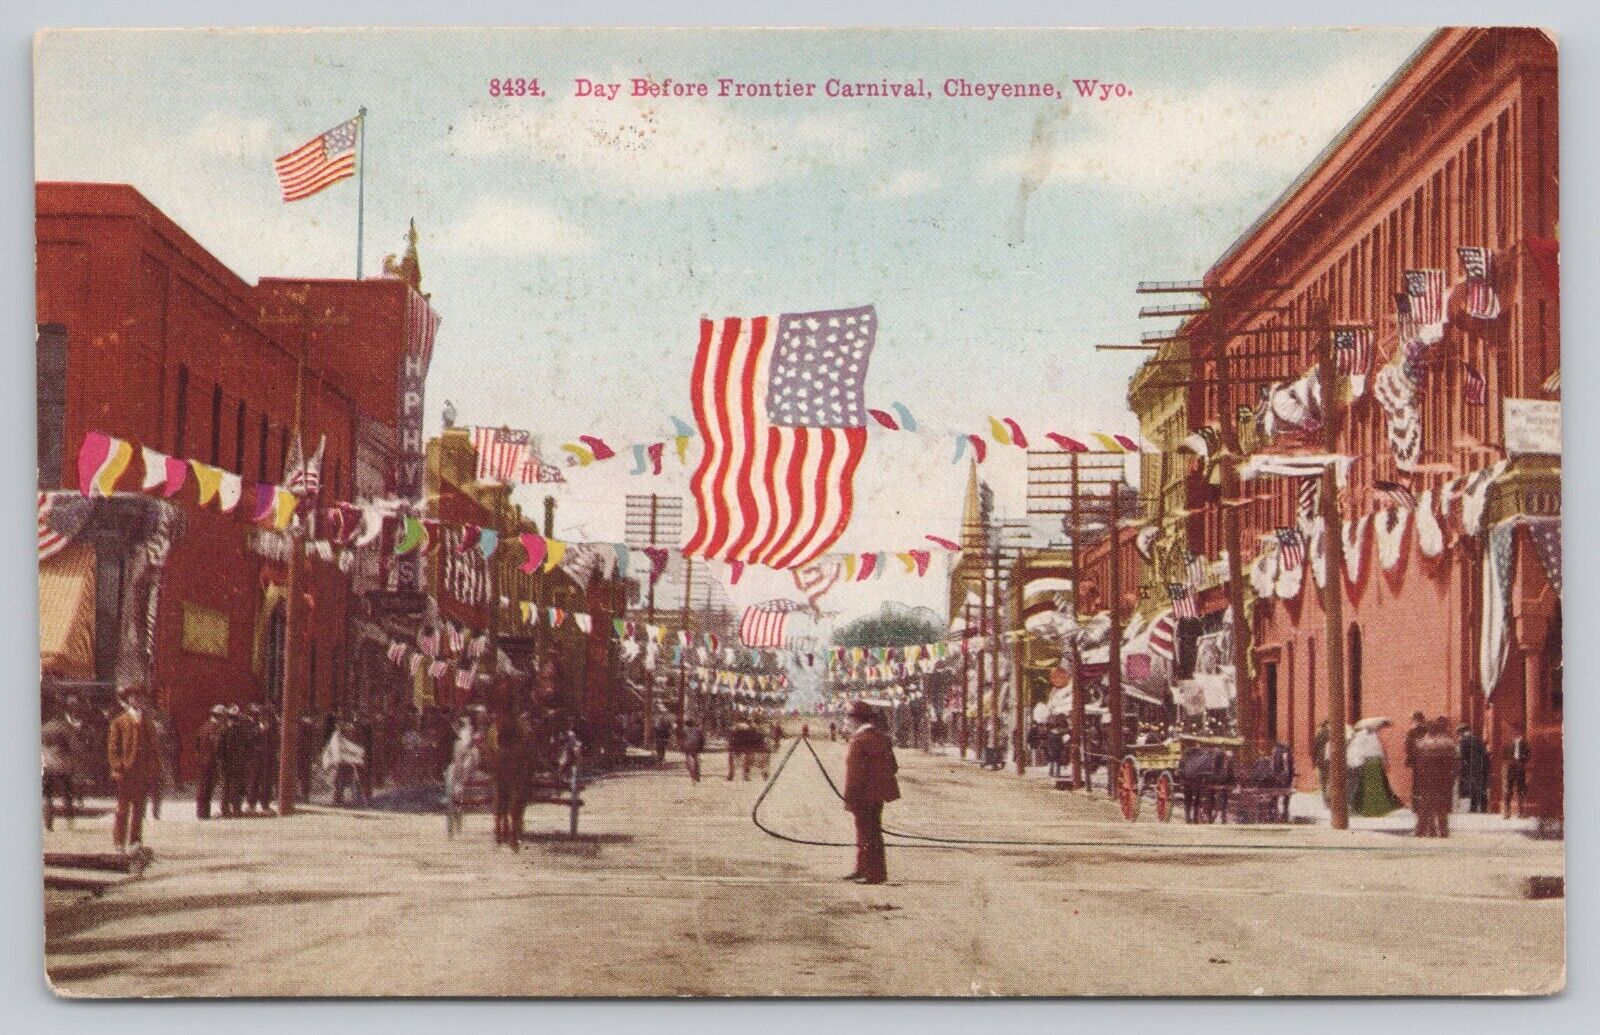 Cheyenne Wyoming Frontier Carnival Flags Storefronts Decorations Postcard 1910